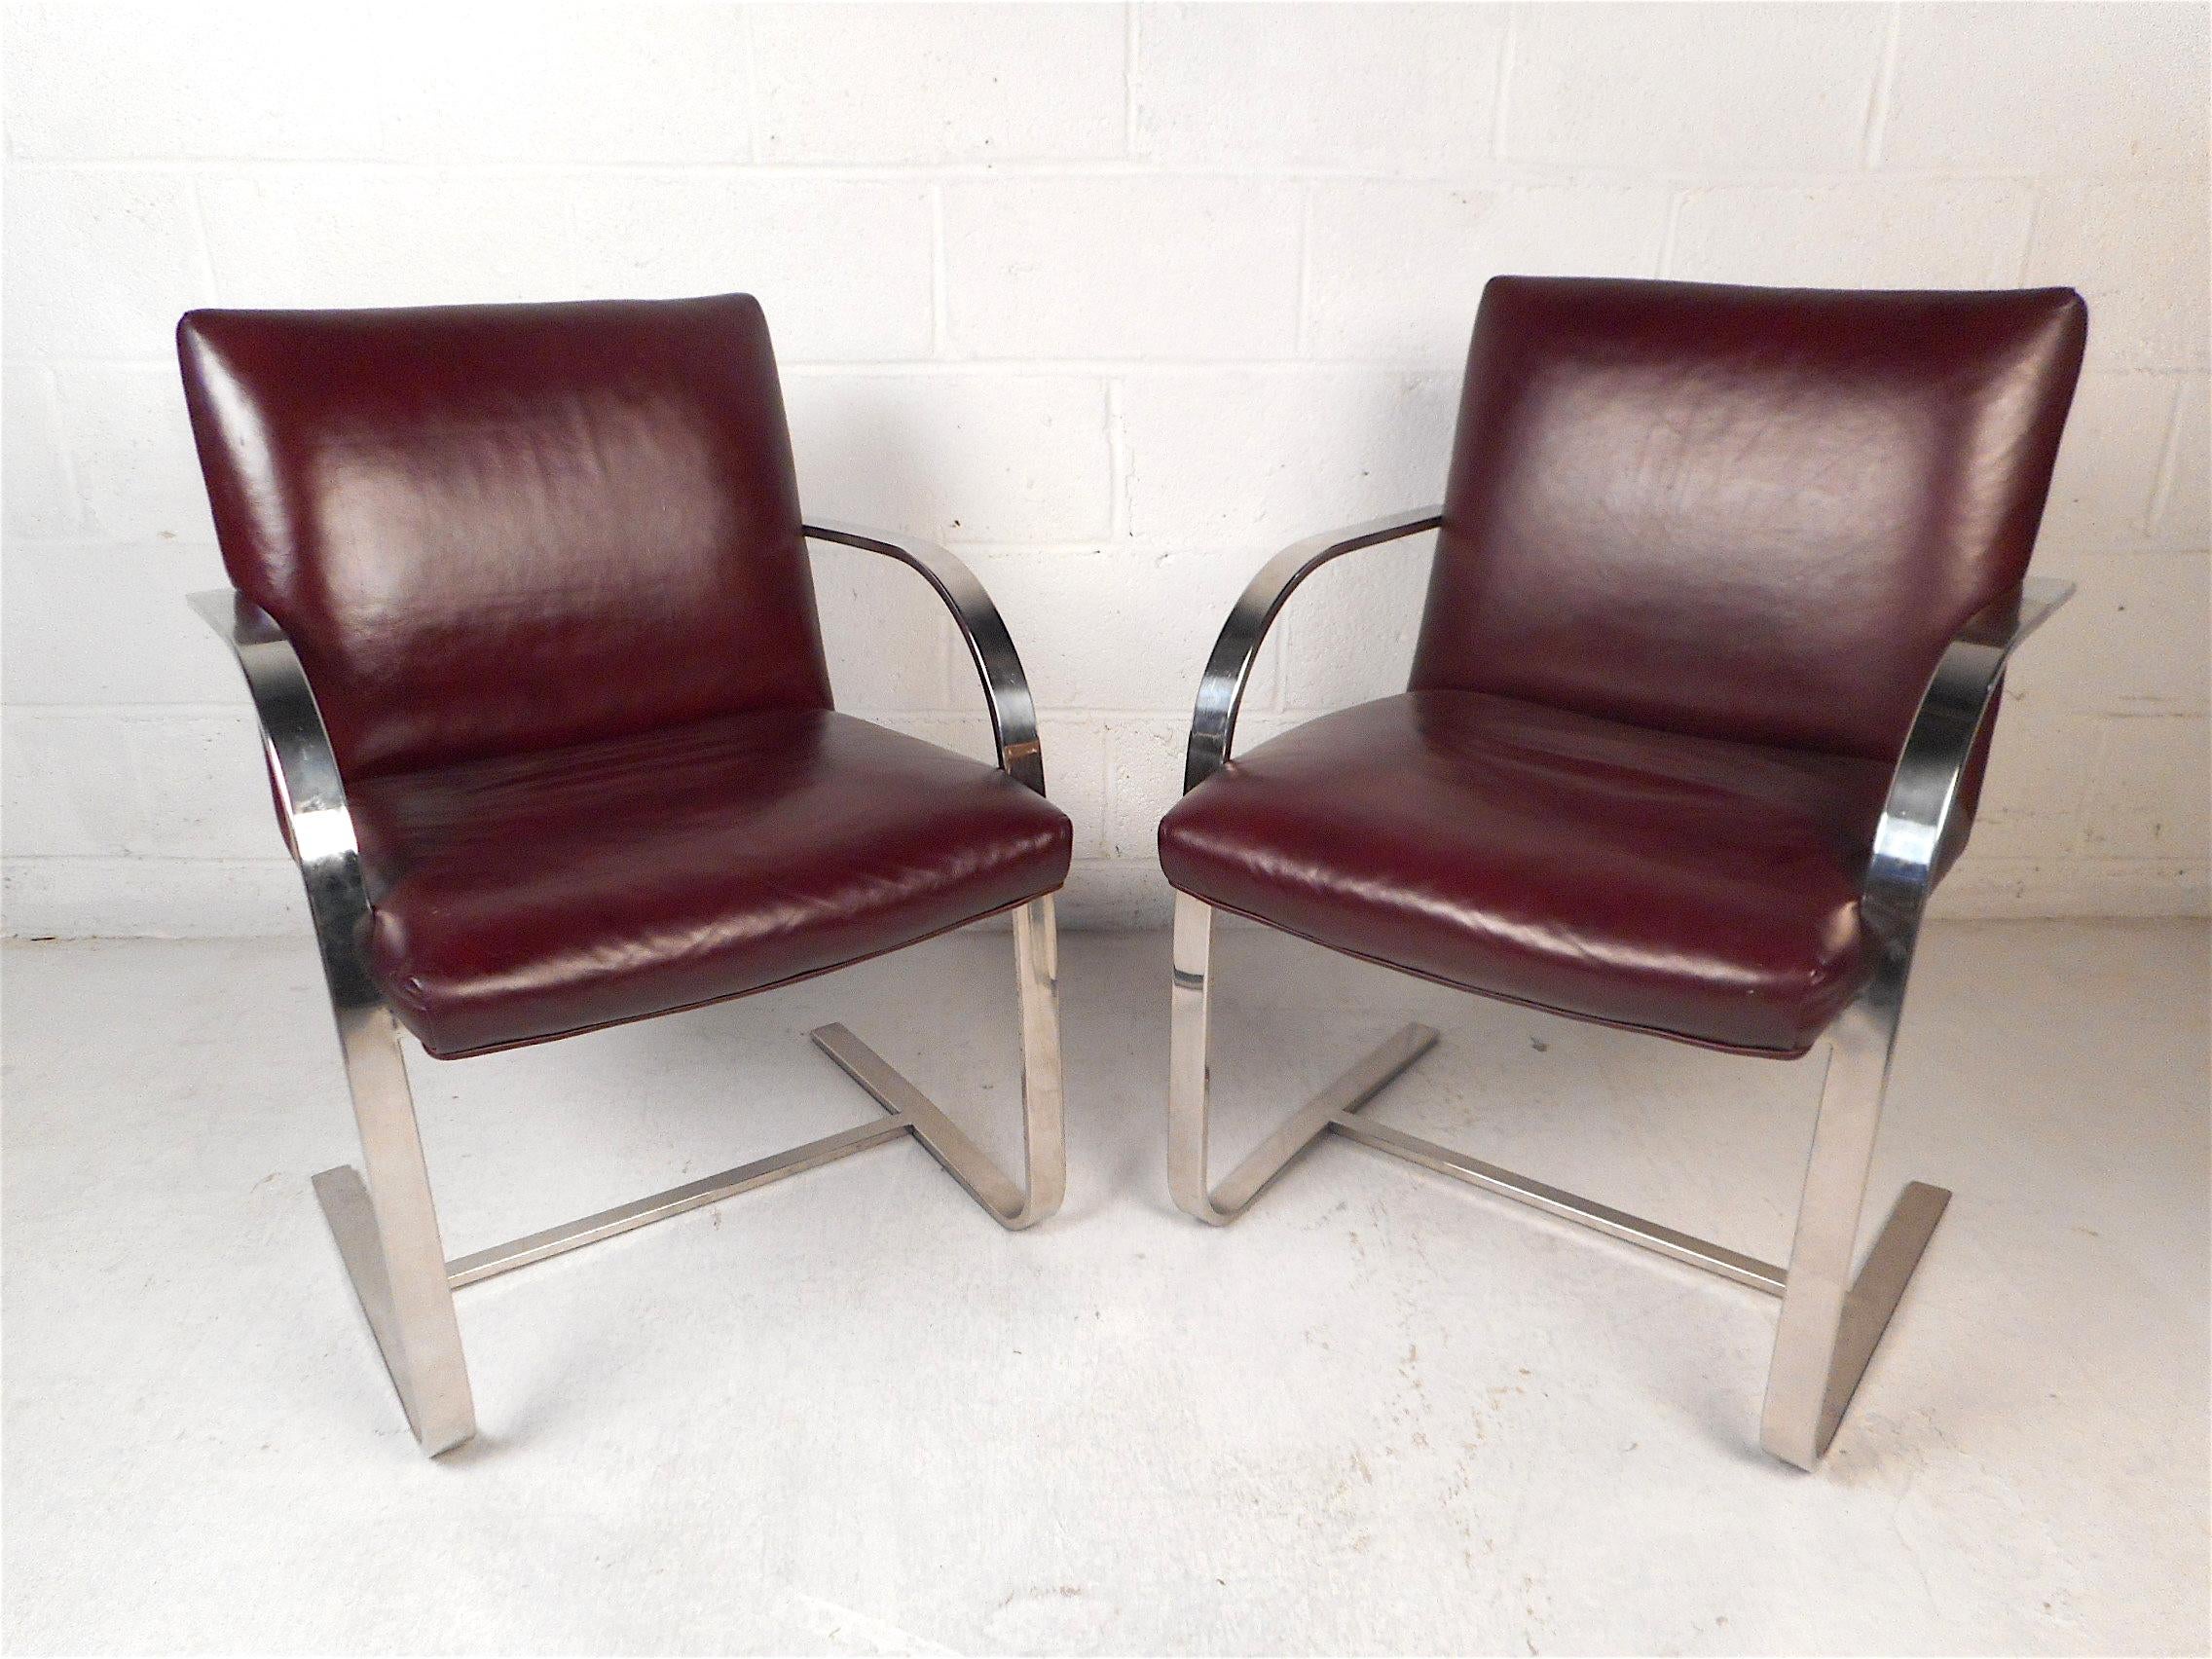 Stylish pair of mid-century armchairs. Sleek chrome frame with curved armrests leading into the cantilevered base supports. Covered in a vintage dark purple vinyl upholstery. Great pair sure to impress in any home, business, or office's modern